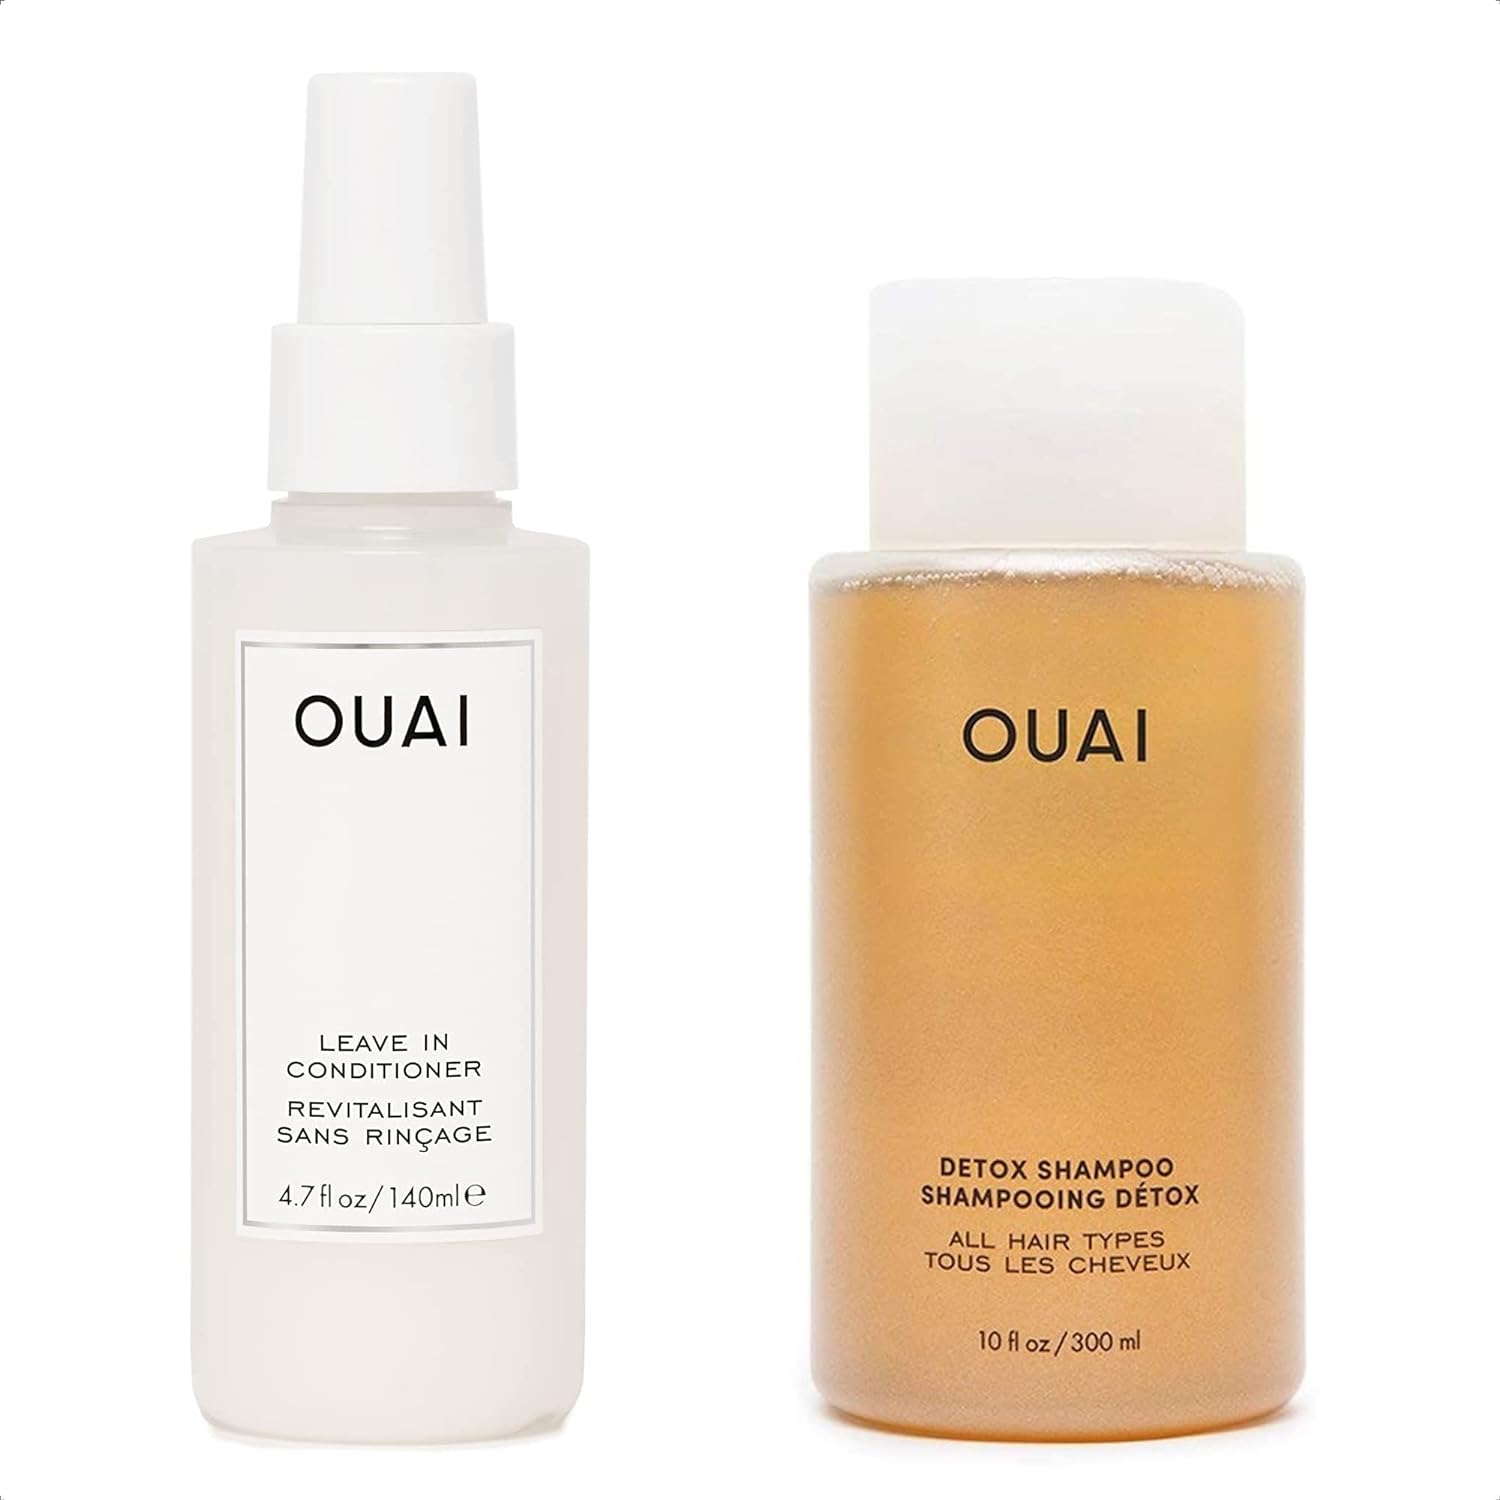 OUAI Hair Styling & Treatment Bundle - Includes Leave-In Conditioner & Detox Shampoo - Hair Care Products for Styling, Smoothing, Adding Hair Shine & Removing Product Build Up (2 Count, 4.7 Oz/10 Oz)